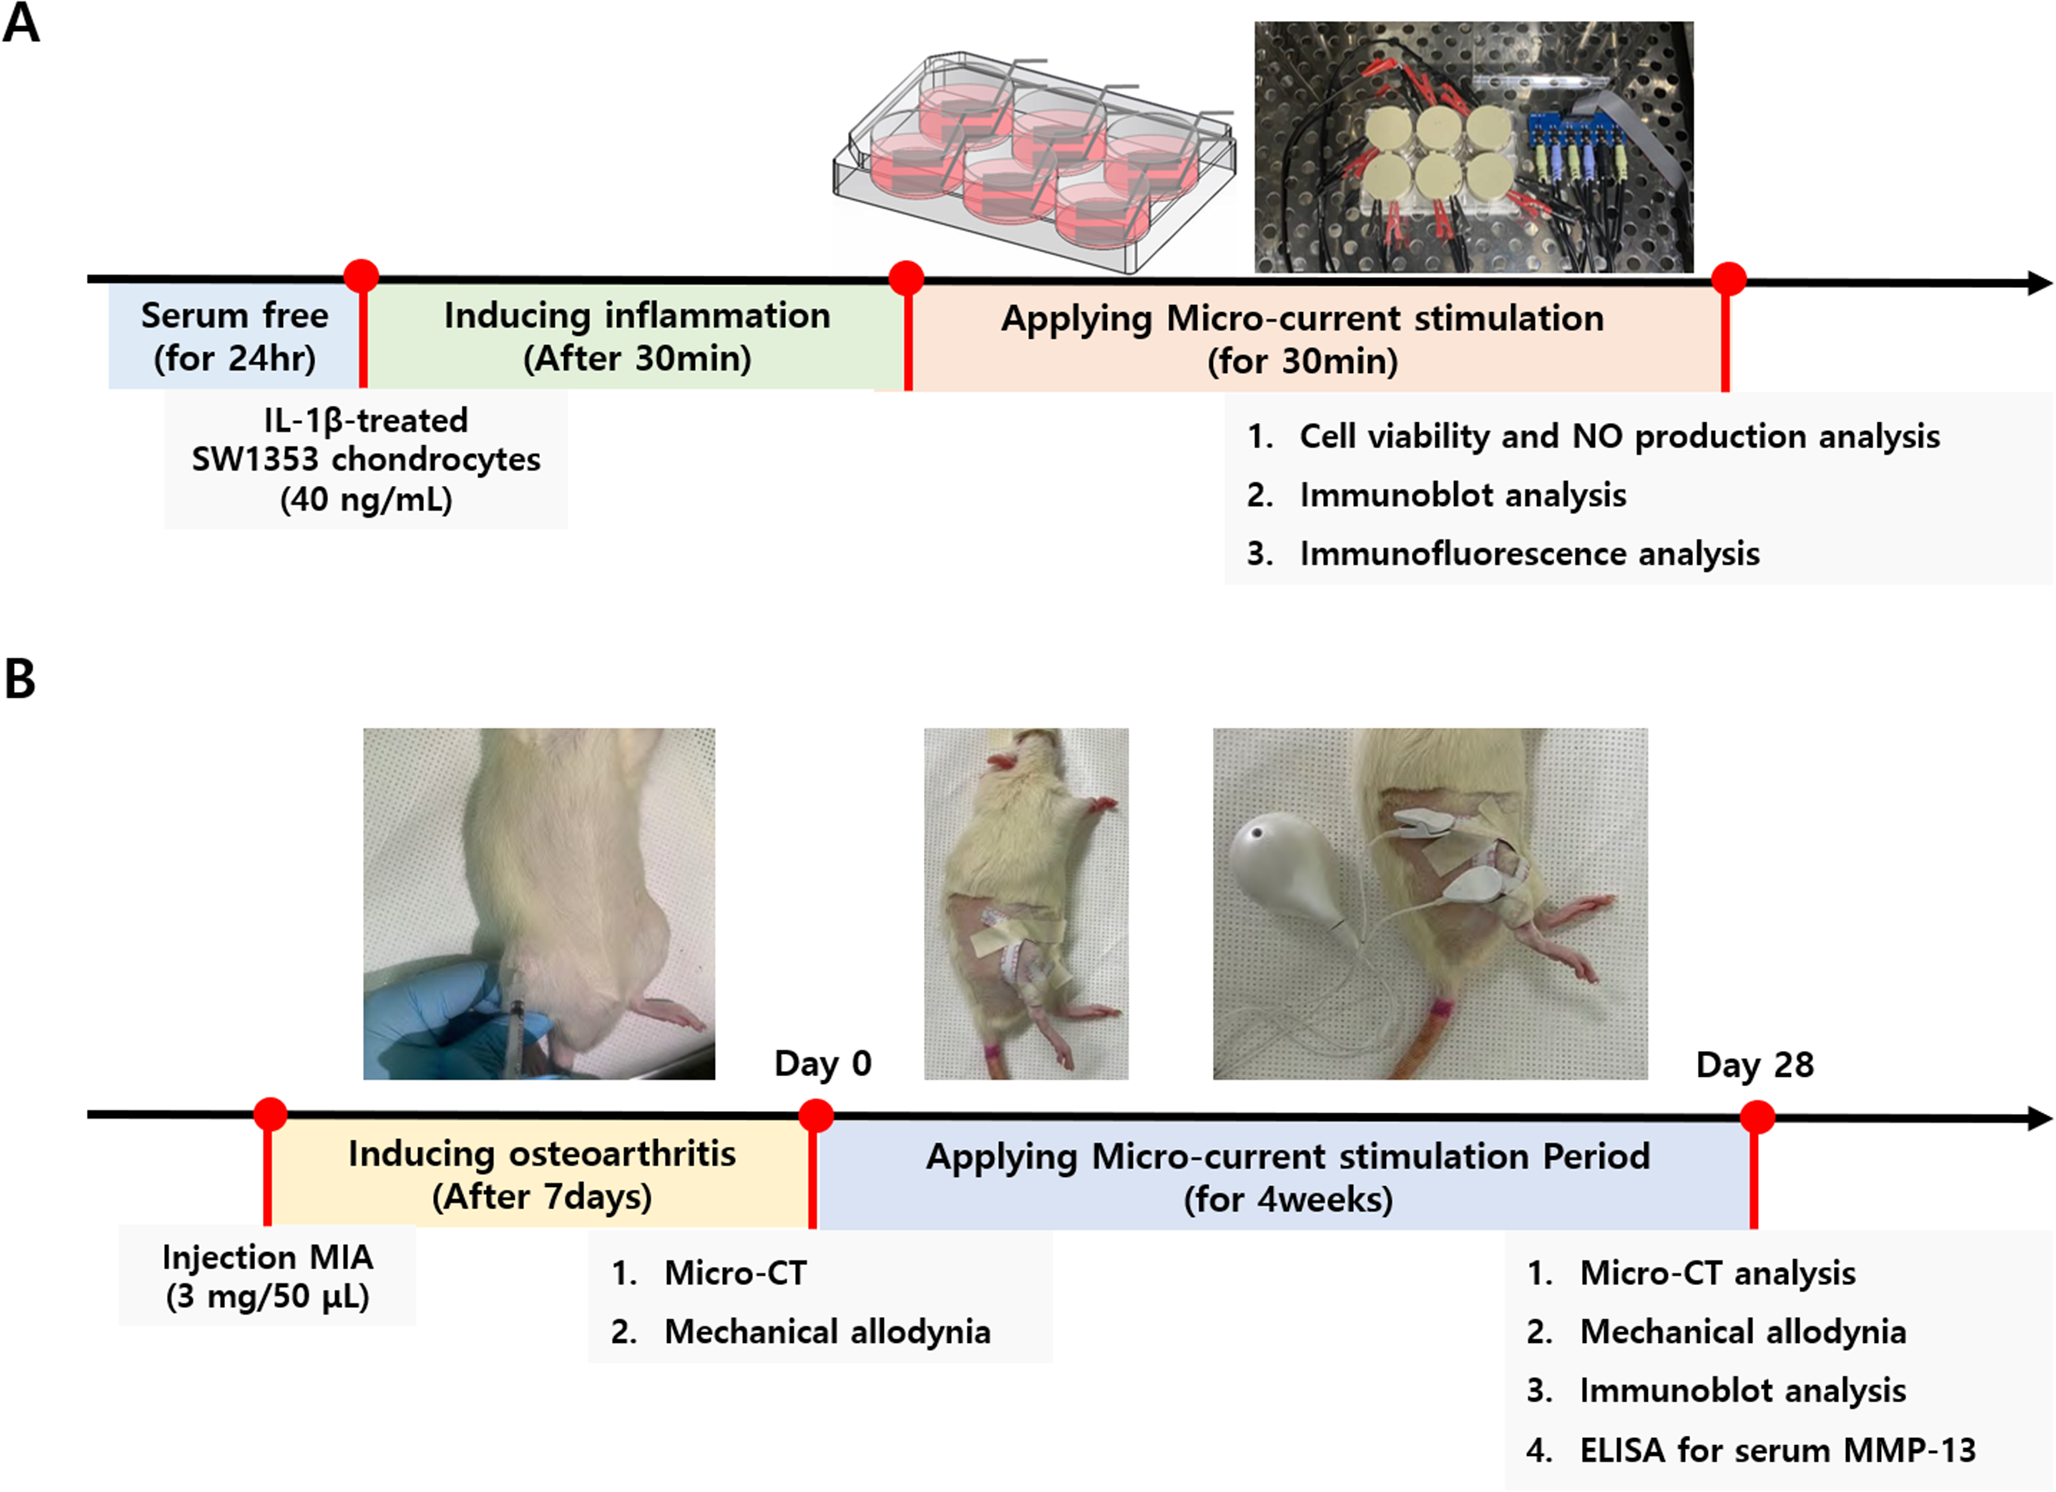 Micro-current stimulation could inhibit IL-1β-induced inflammatory responses in chondrocytes and protect knee bone cartilage from osteoarthritis